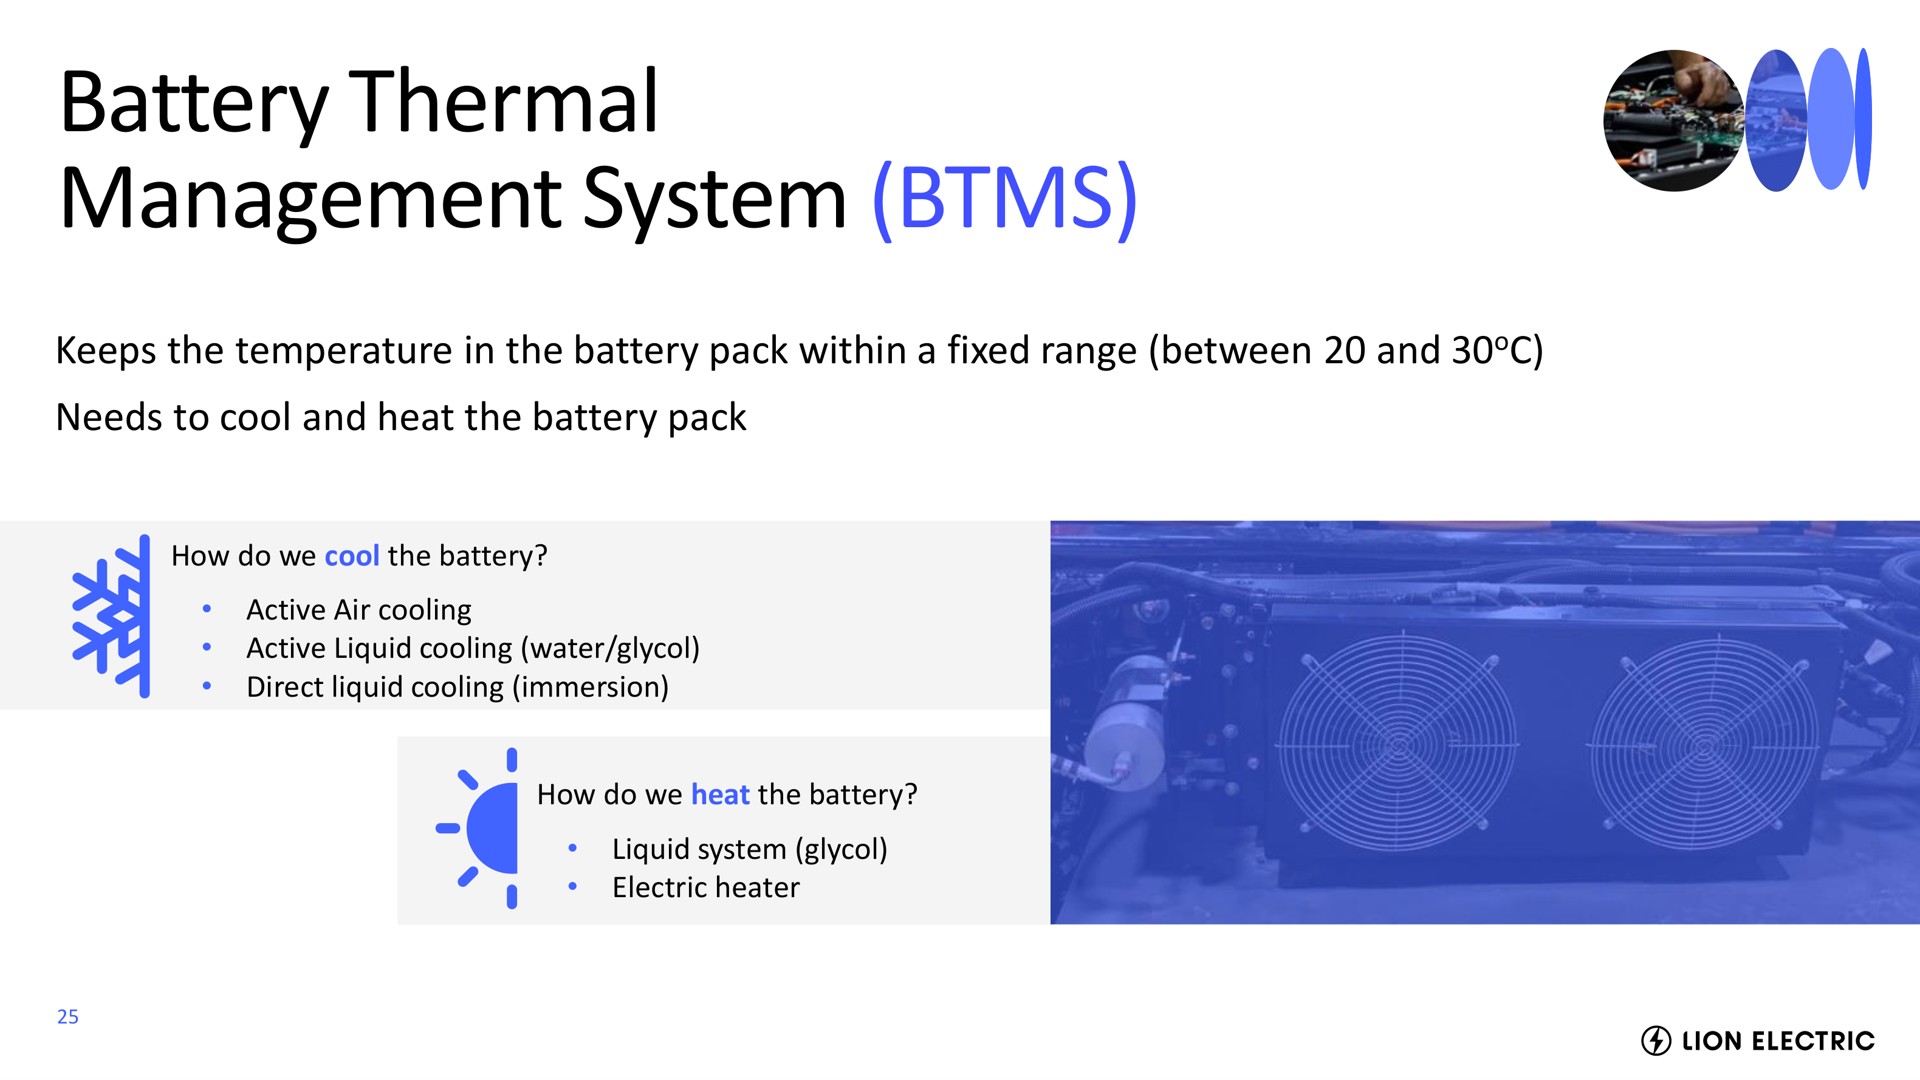 battery thermal management system | Lion Electric